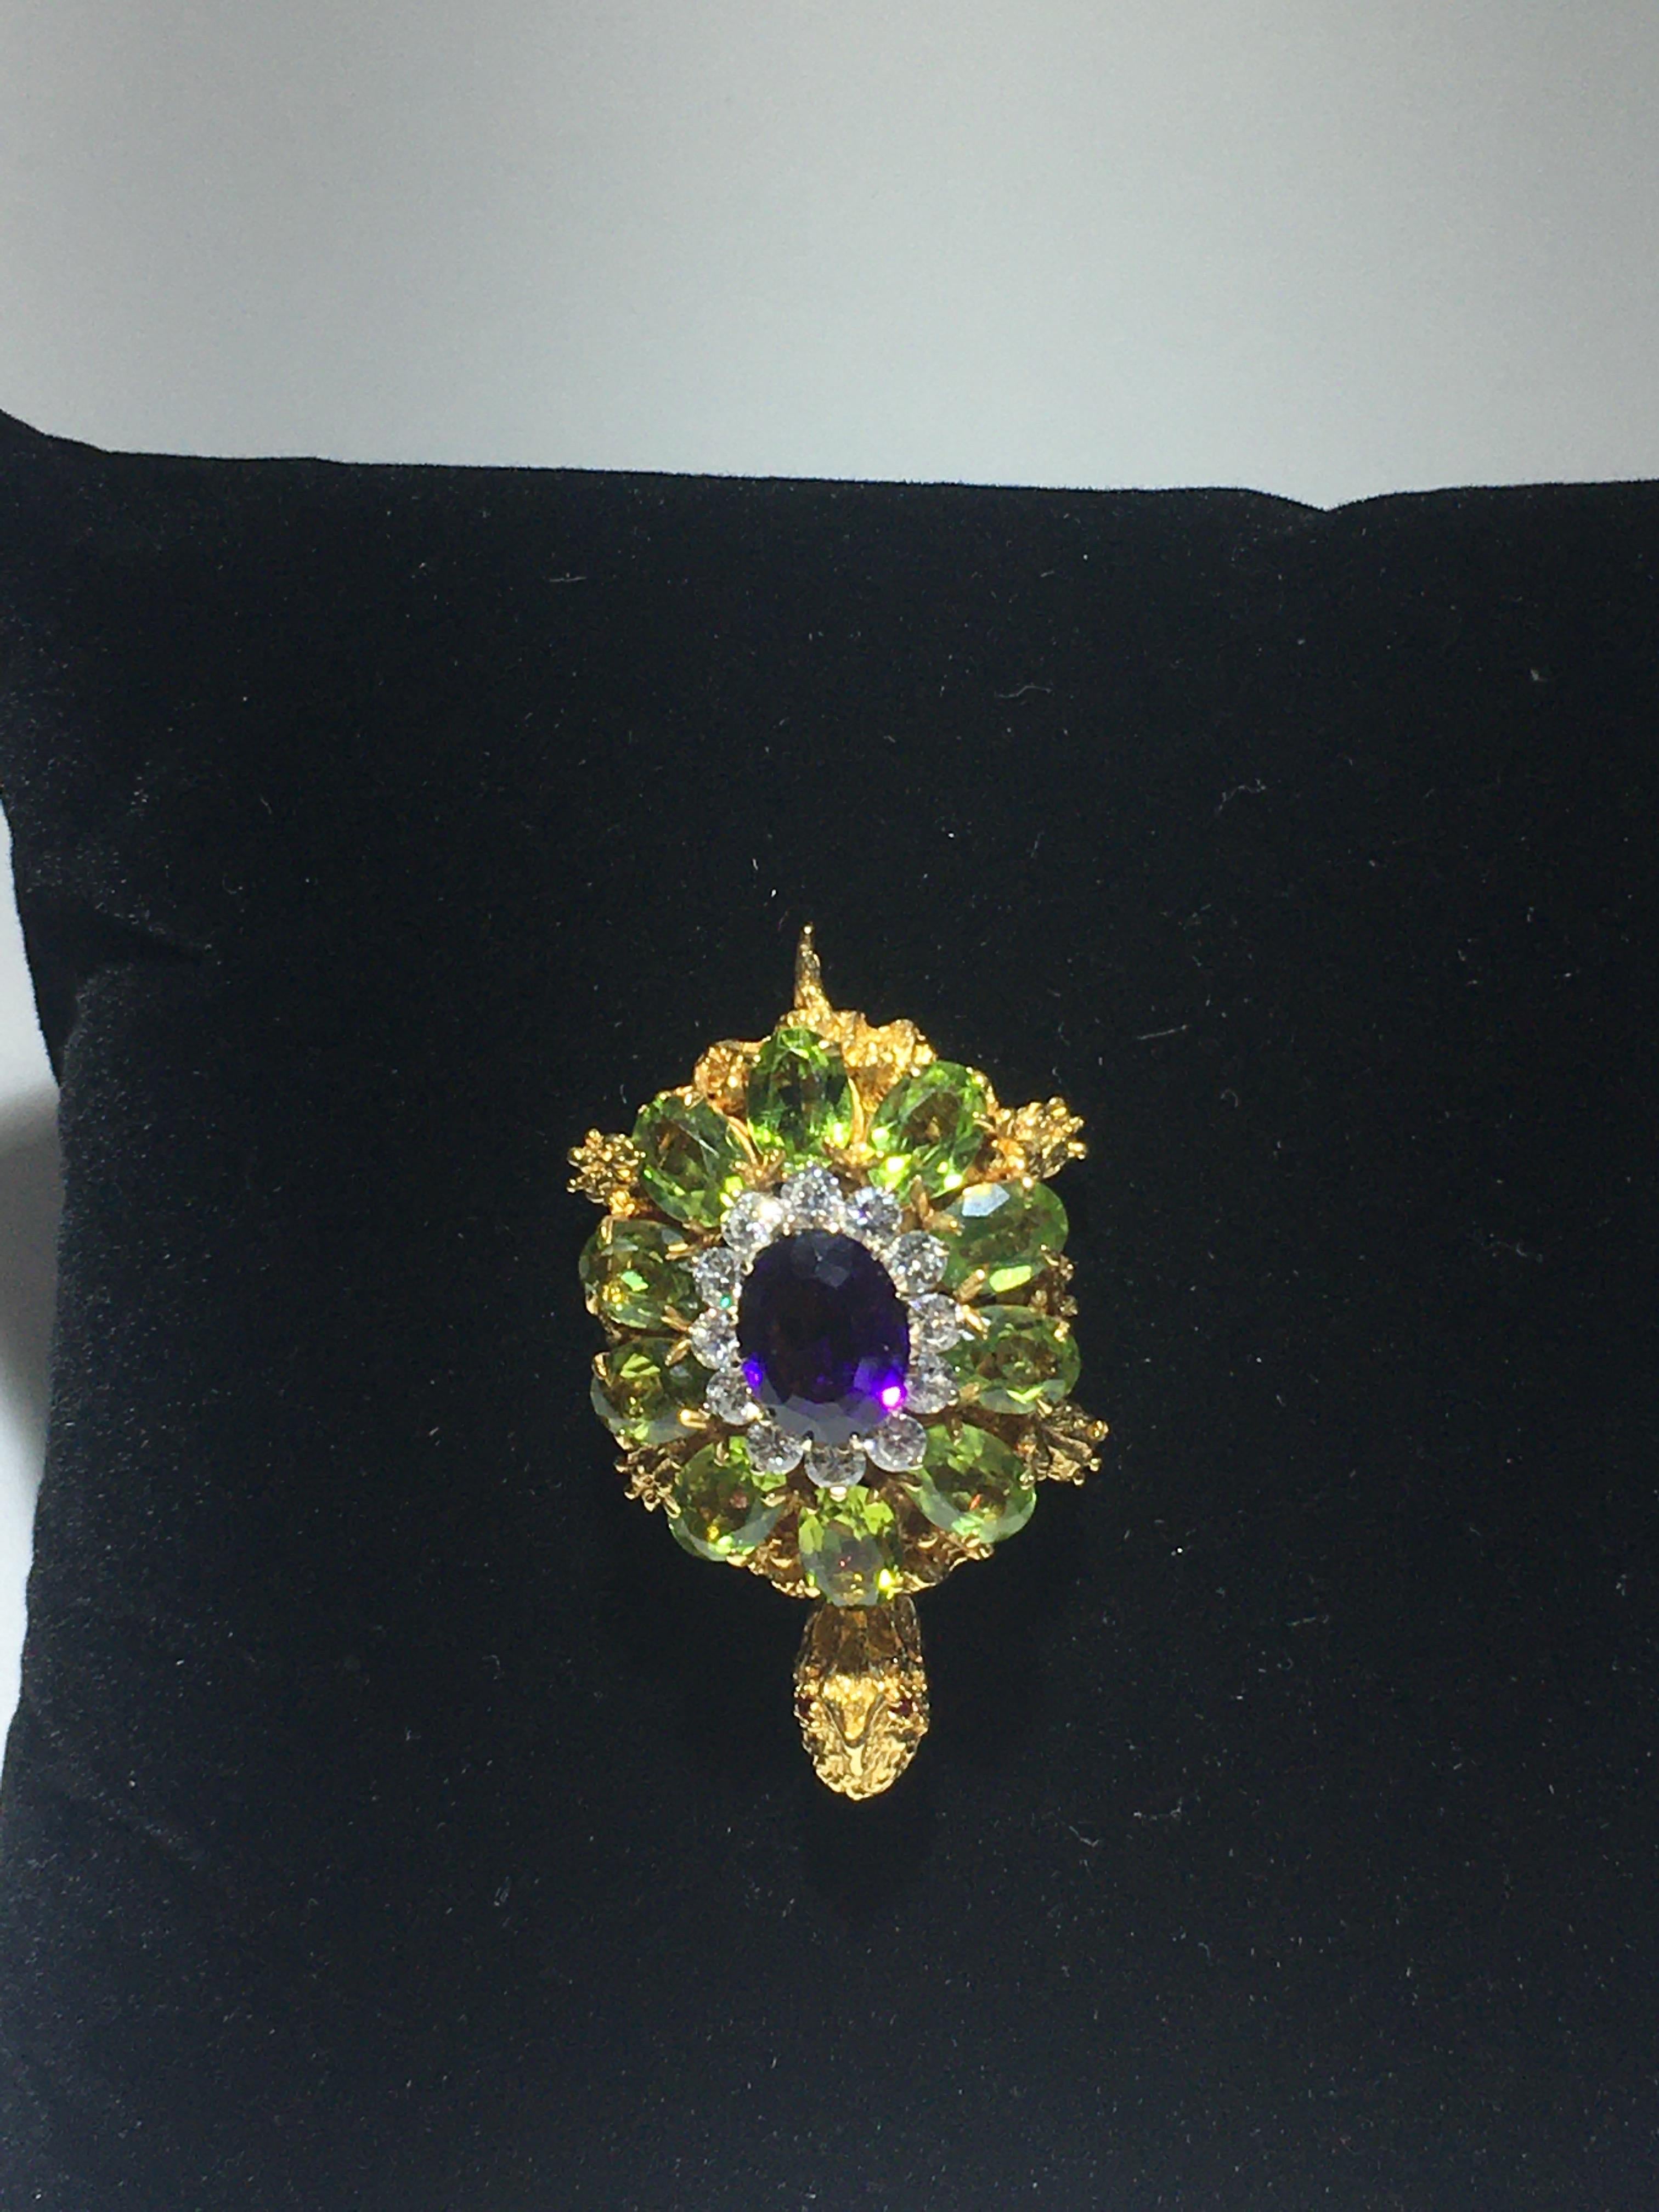 Women's or Men's 18 Karat Yellow Gold, Amethyst, Diamond, Peridot Pin The The Style Of Rosenthal. For Sale